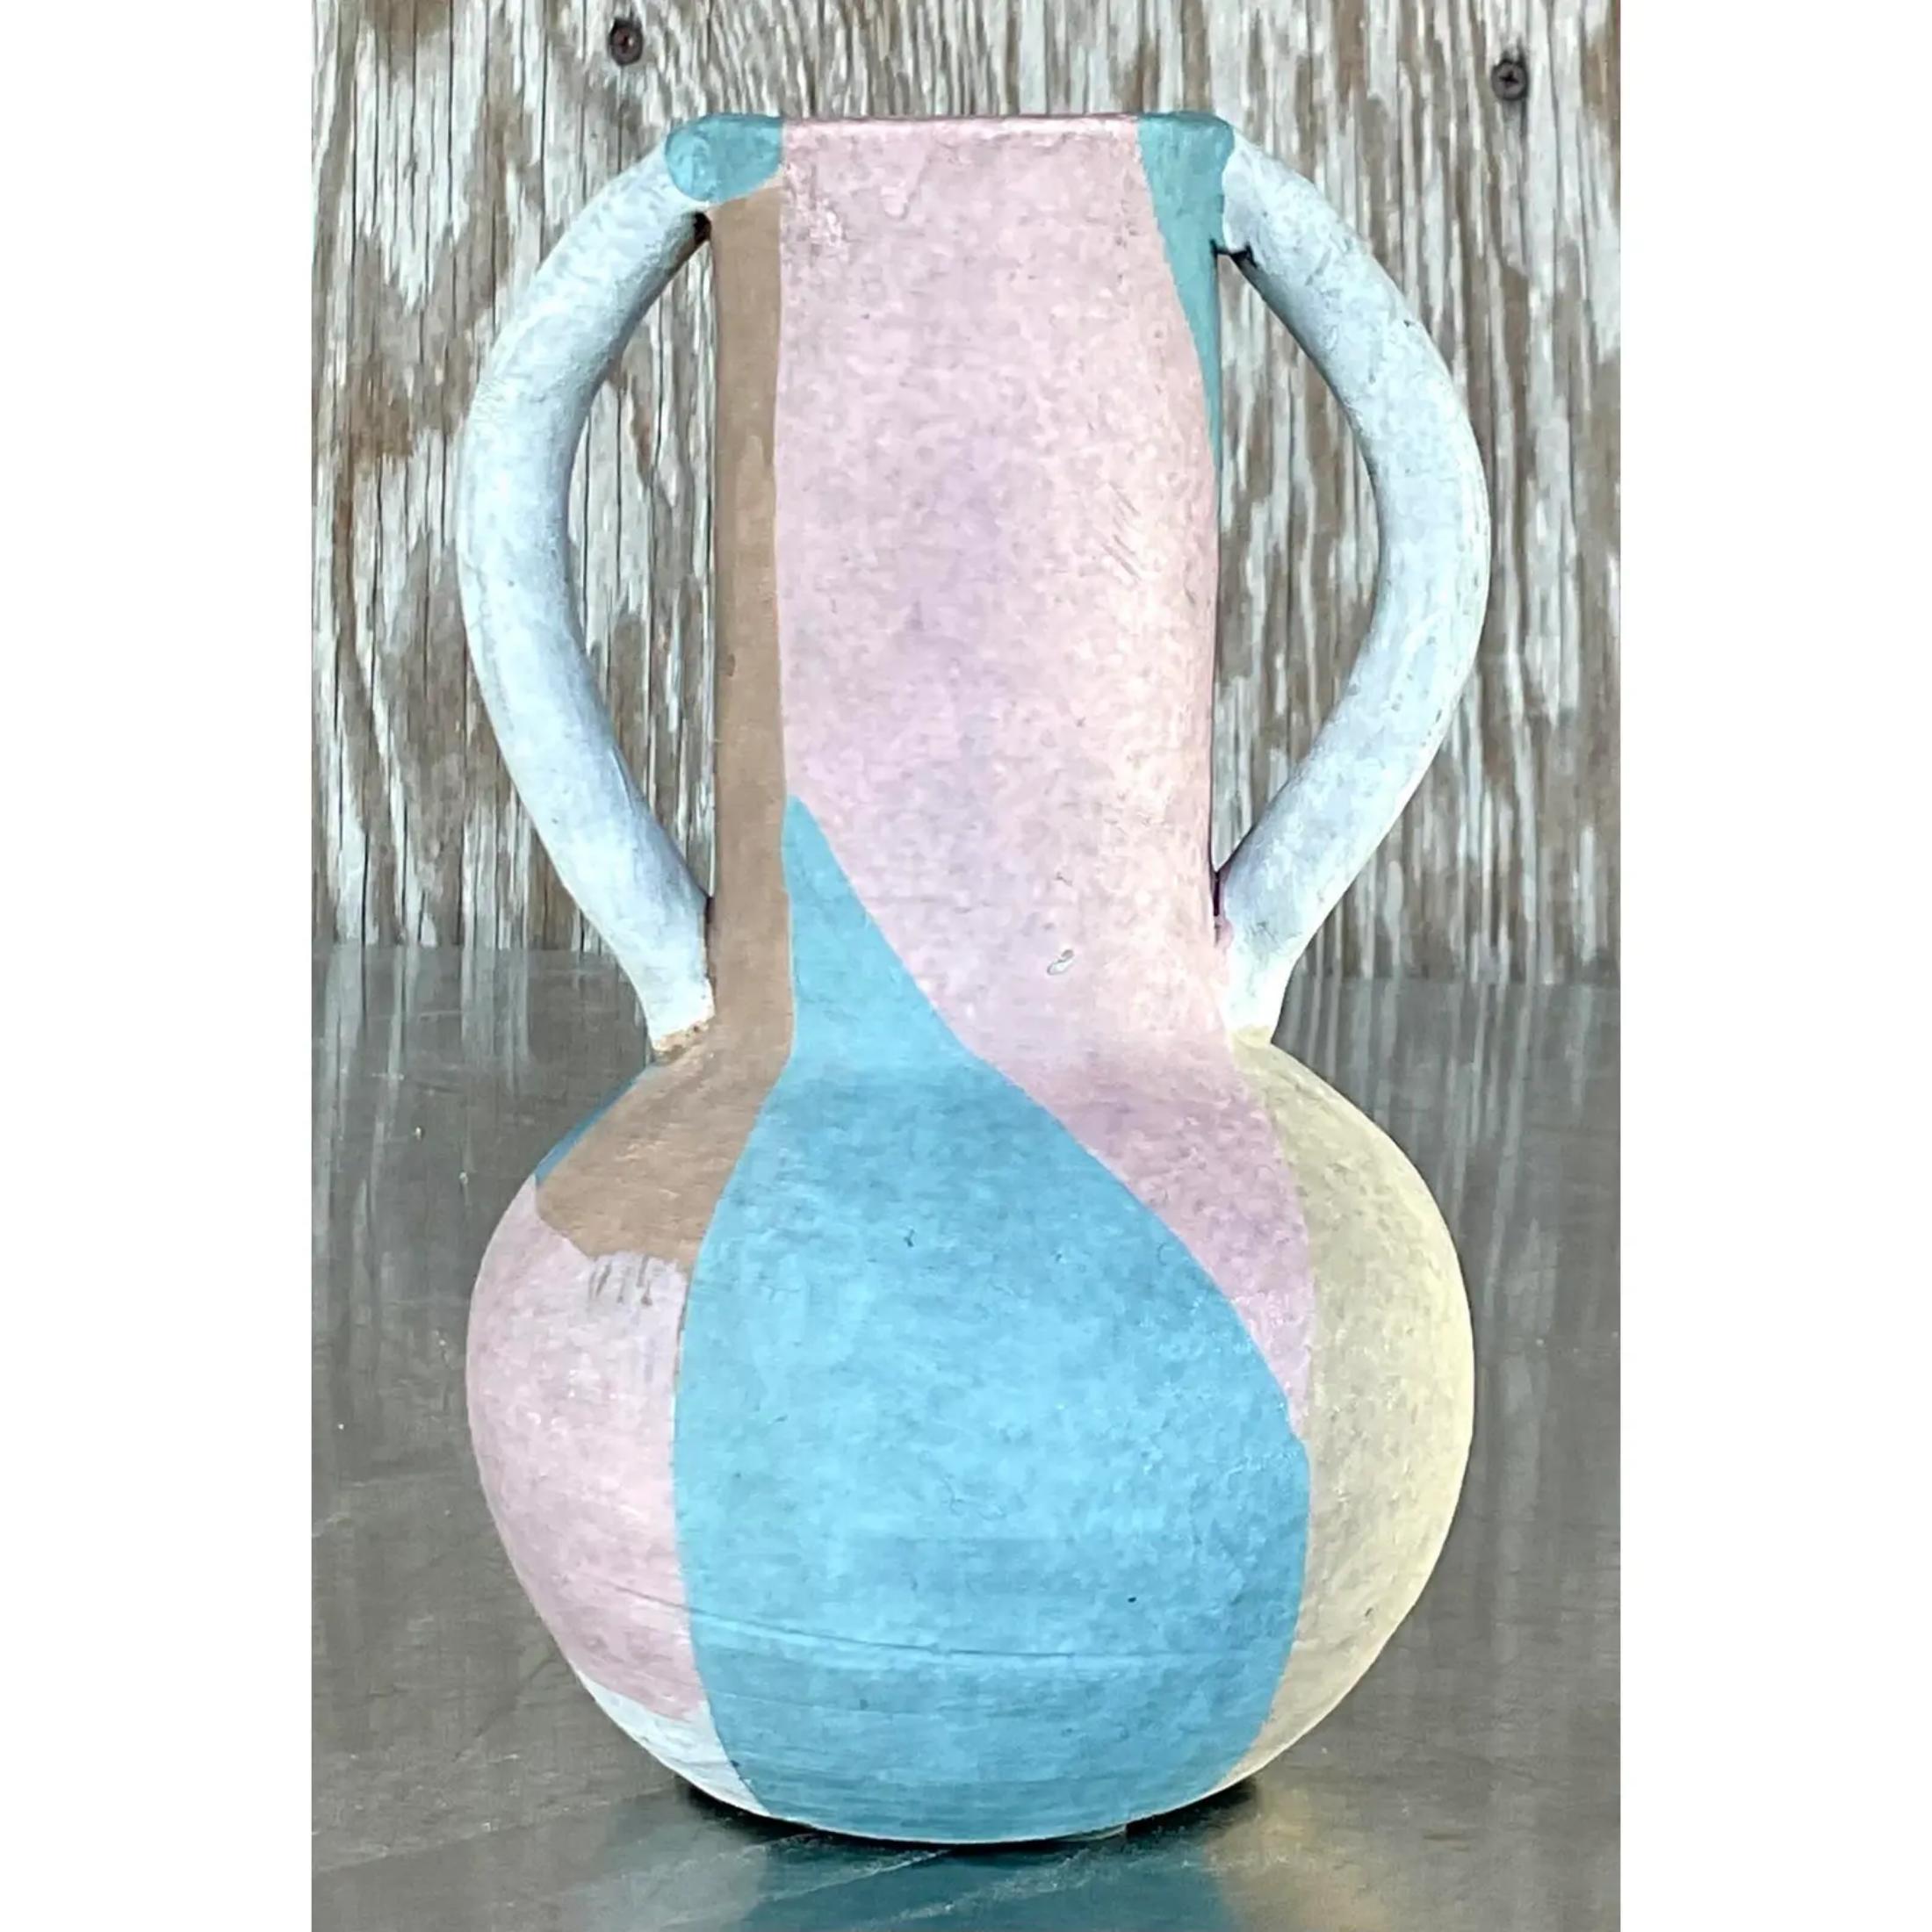 A fabulous vintage Boho vase. A chic Postmodern design in pale muted colors. Acquired from a Palm Beach estate.